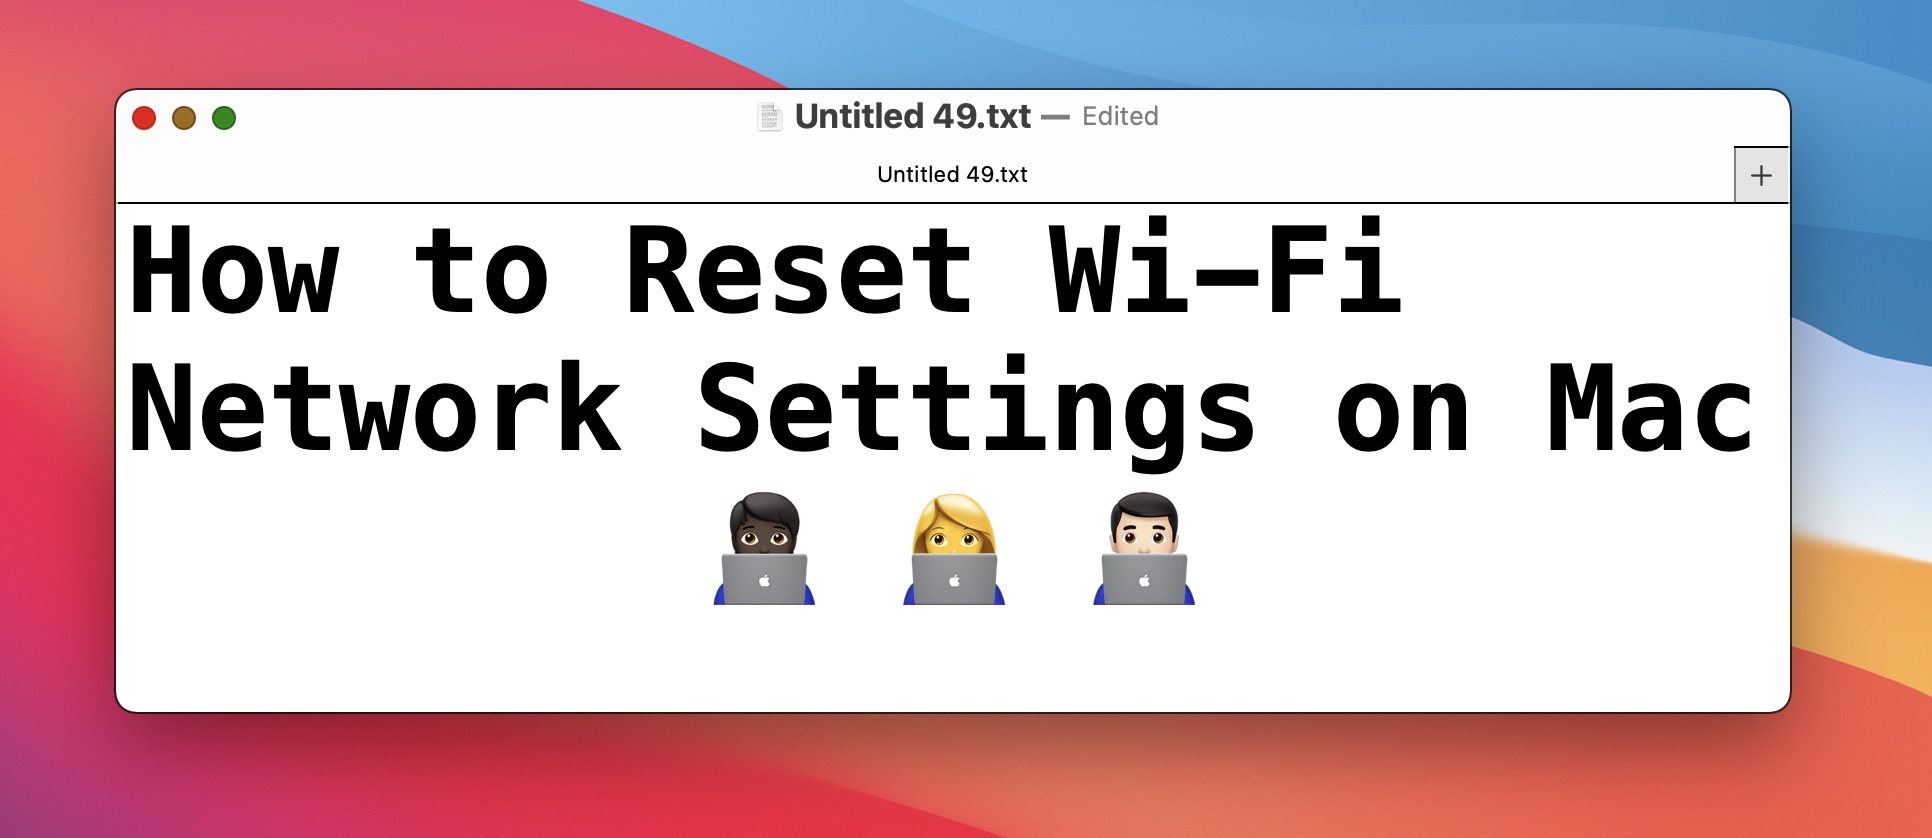 How to Reset Network Settings on Mac  OSXDaily